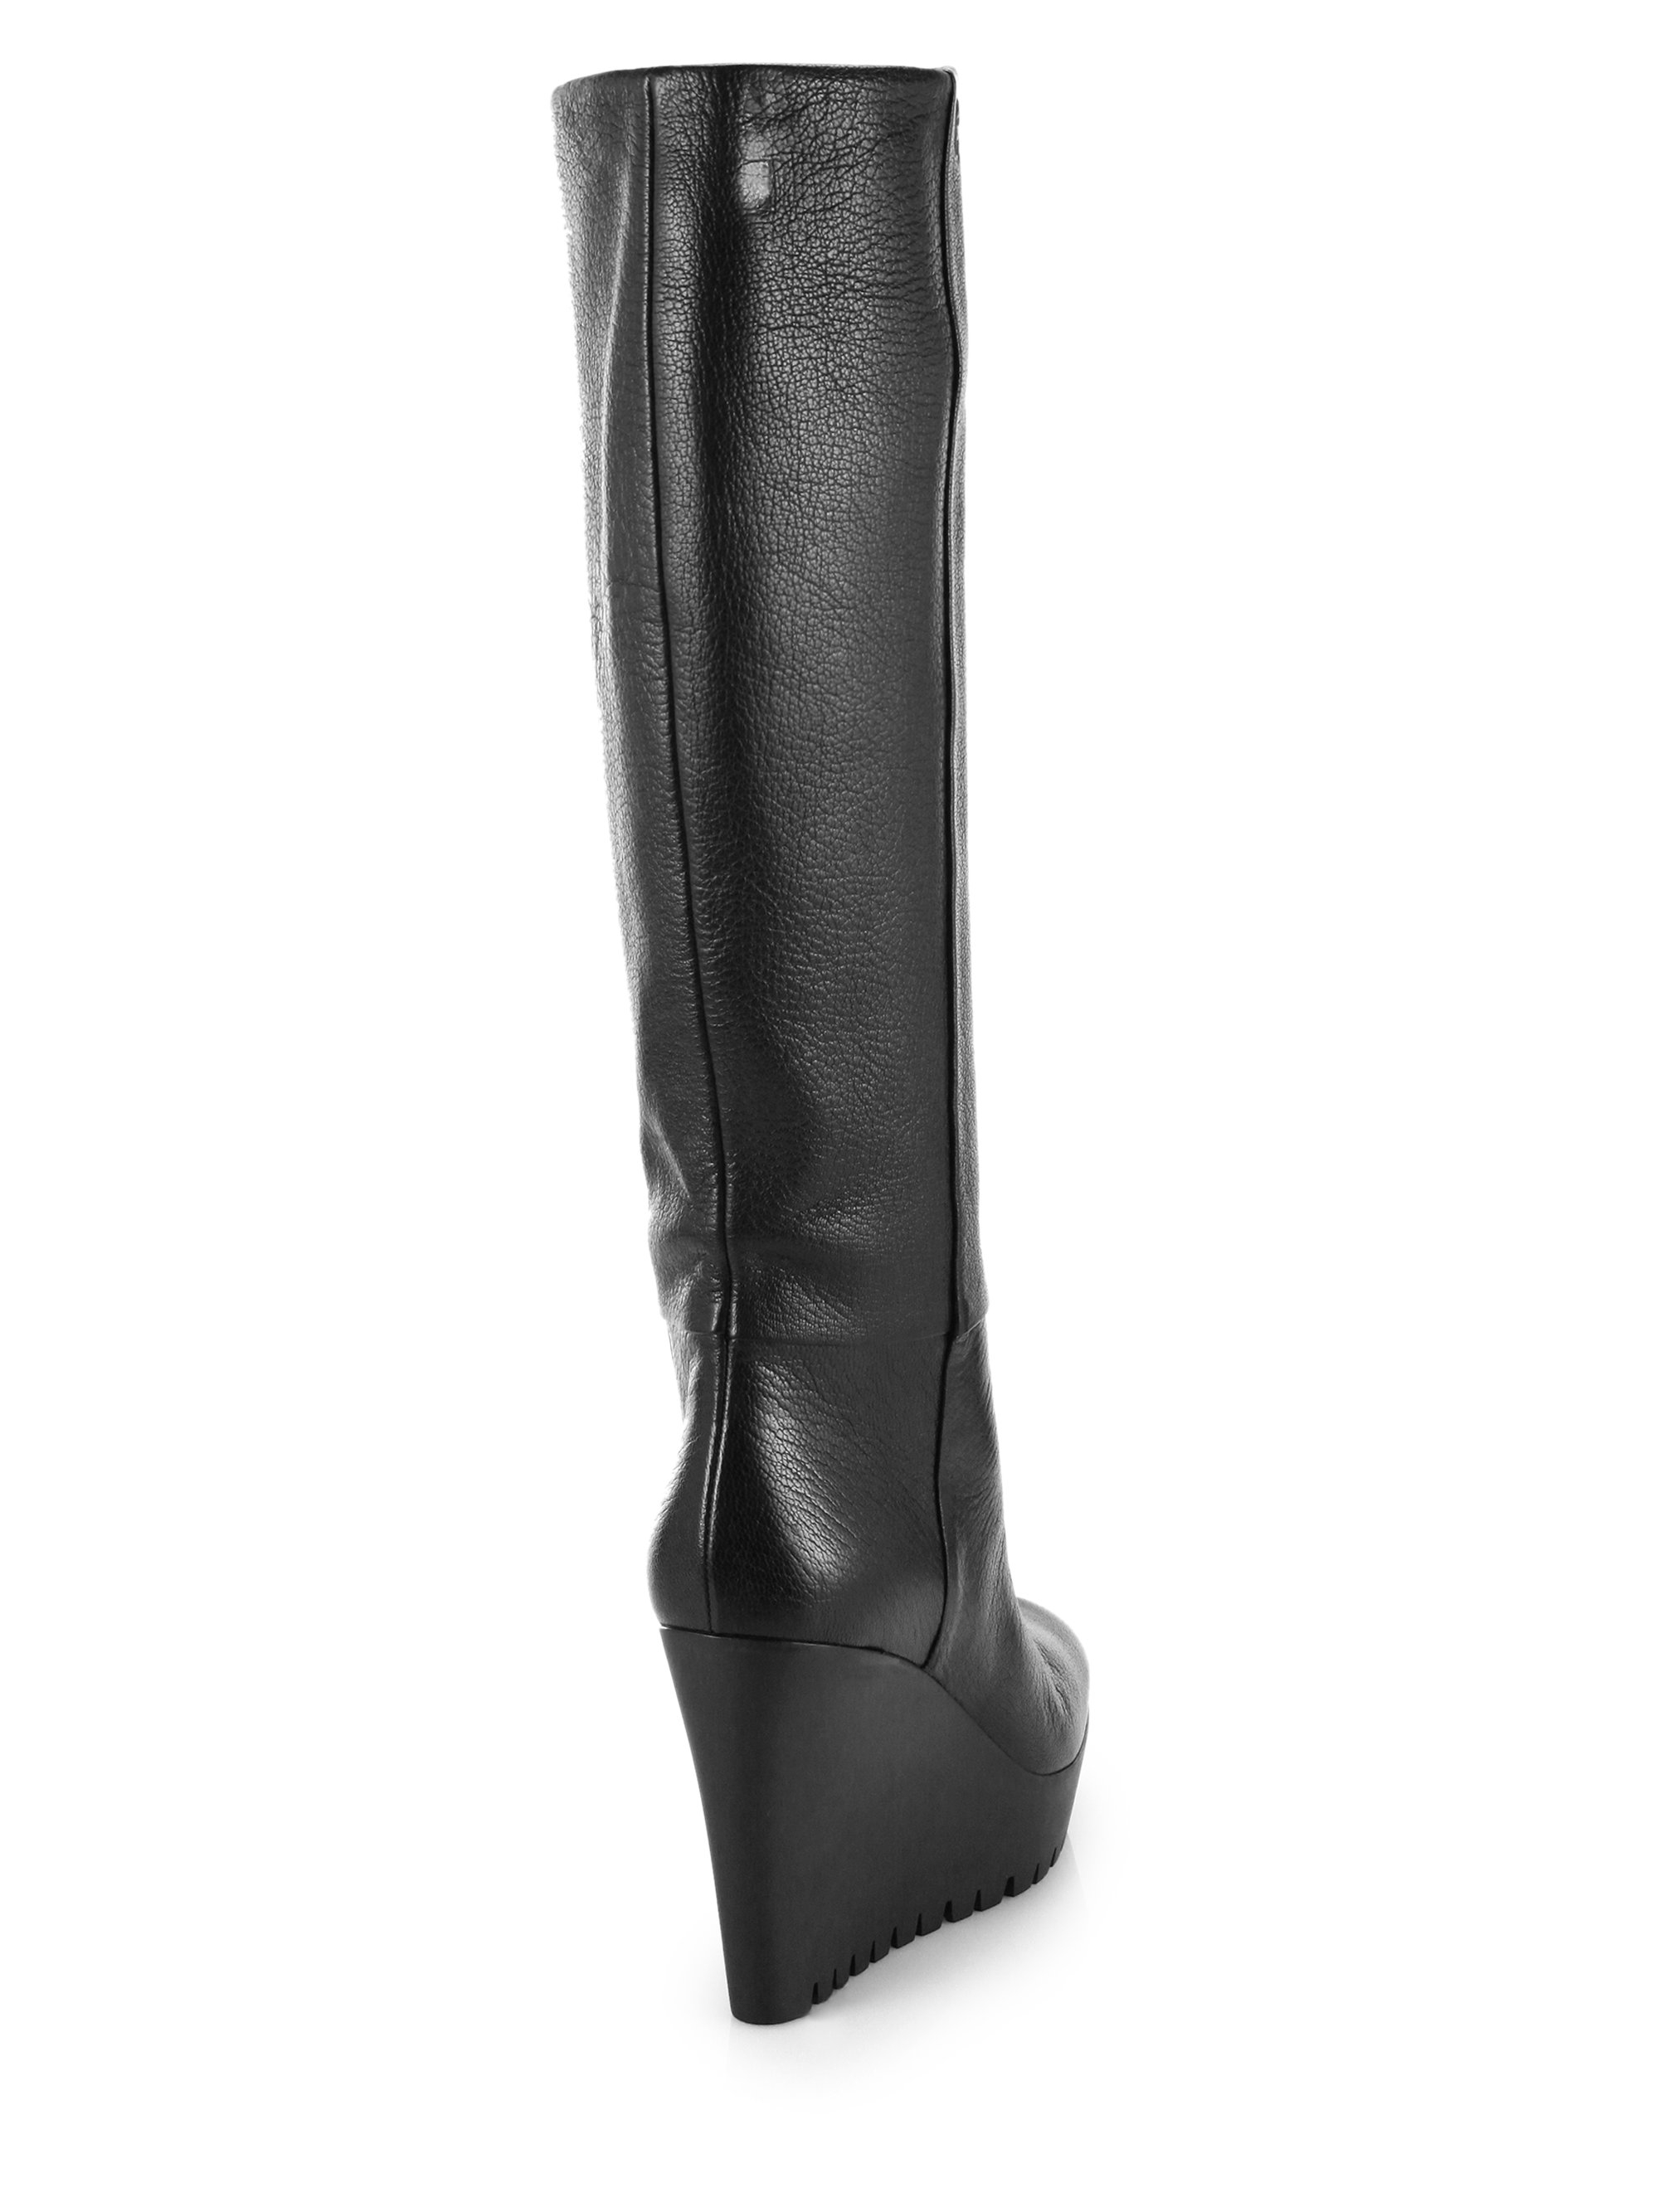 Gucci Marion Knee-High Leather Wedge Boots in Black - Lyst